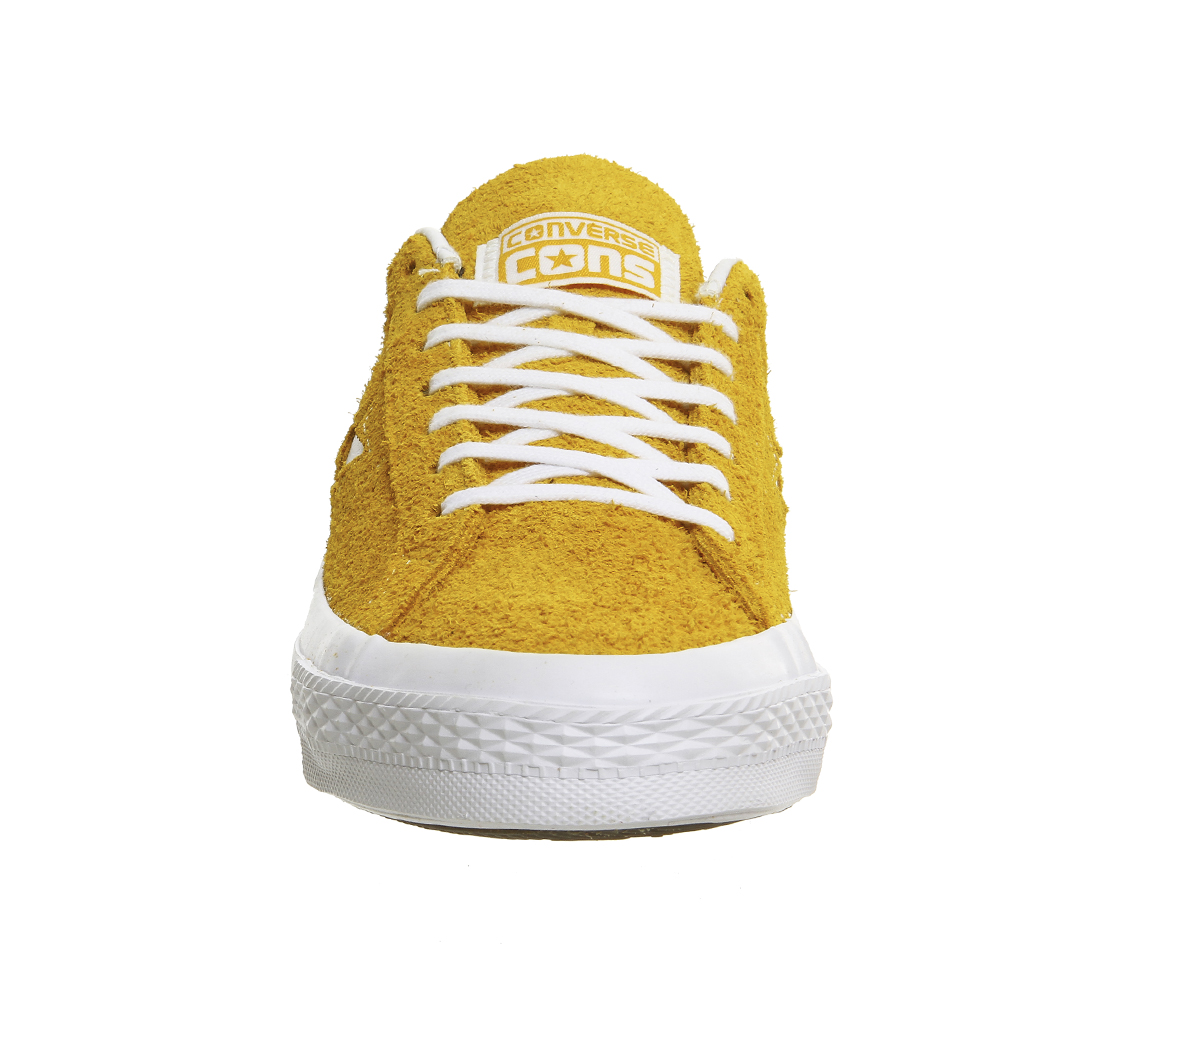 Converse One Star Skate Yellow White Gum Hairy Suede - His trainers